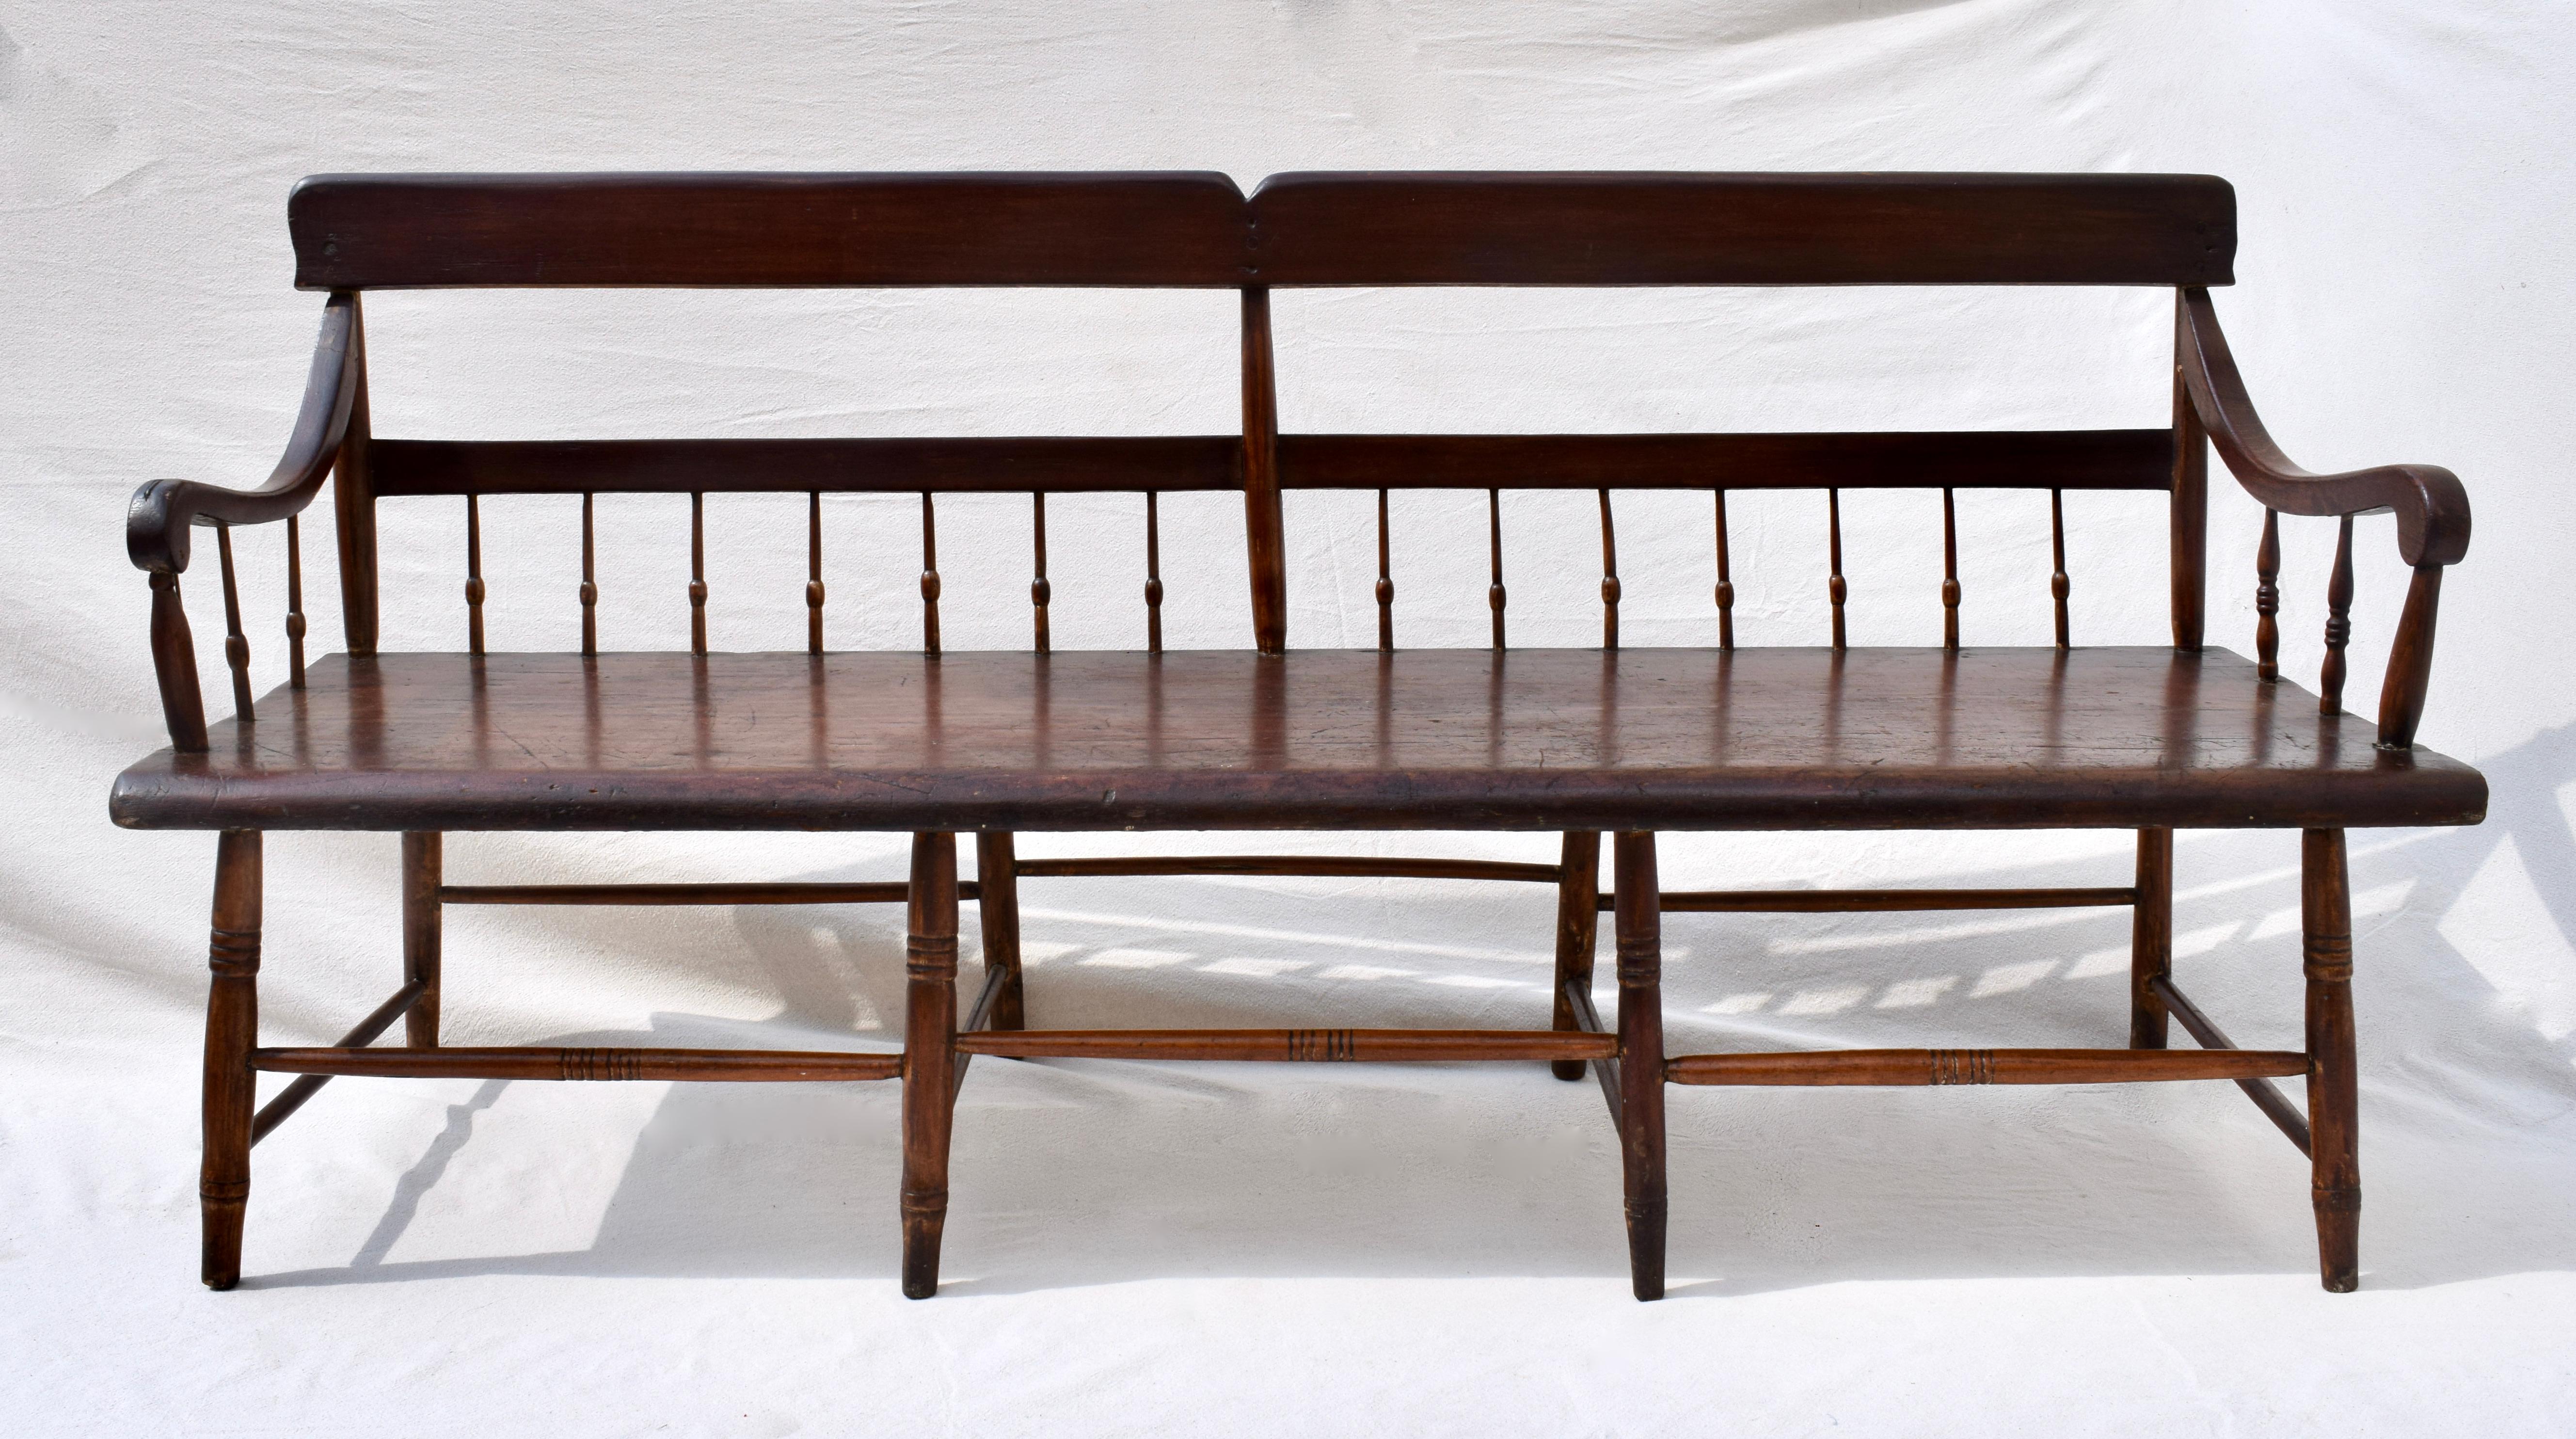 19th C. Pennsylvania pine & poplar Windsor bench with half spindles & plank seat, enhanced with a single custom cushion in new vintage stock hand loomed flame stitch upholstery.